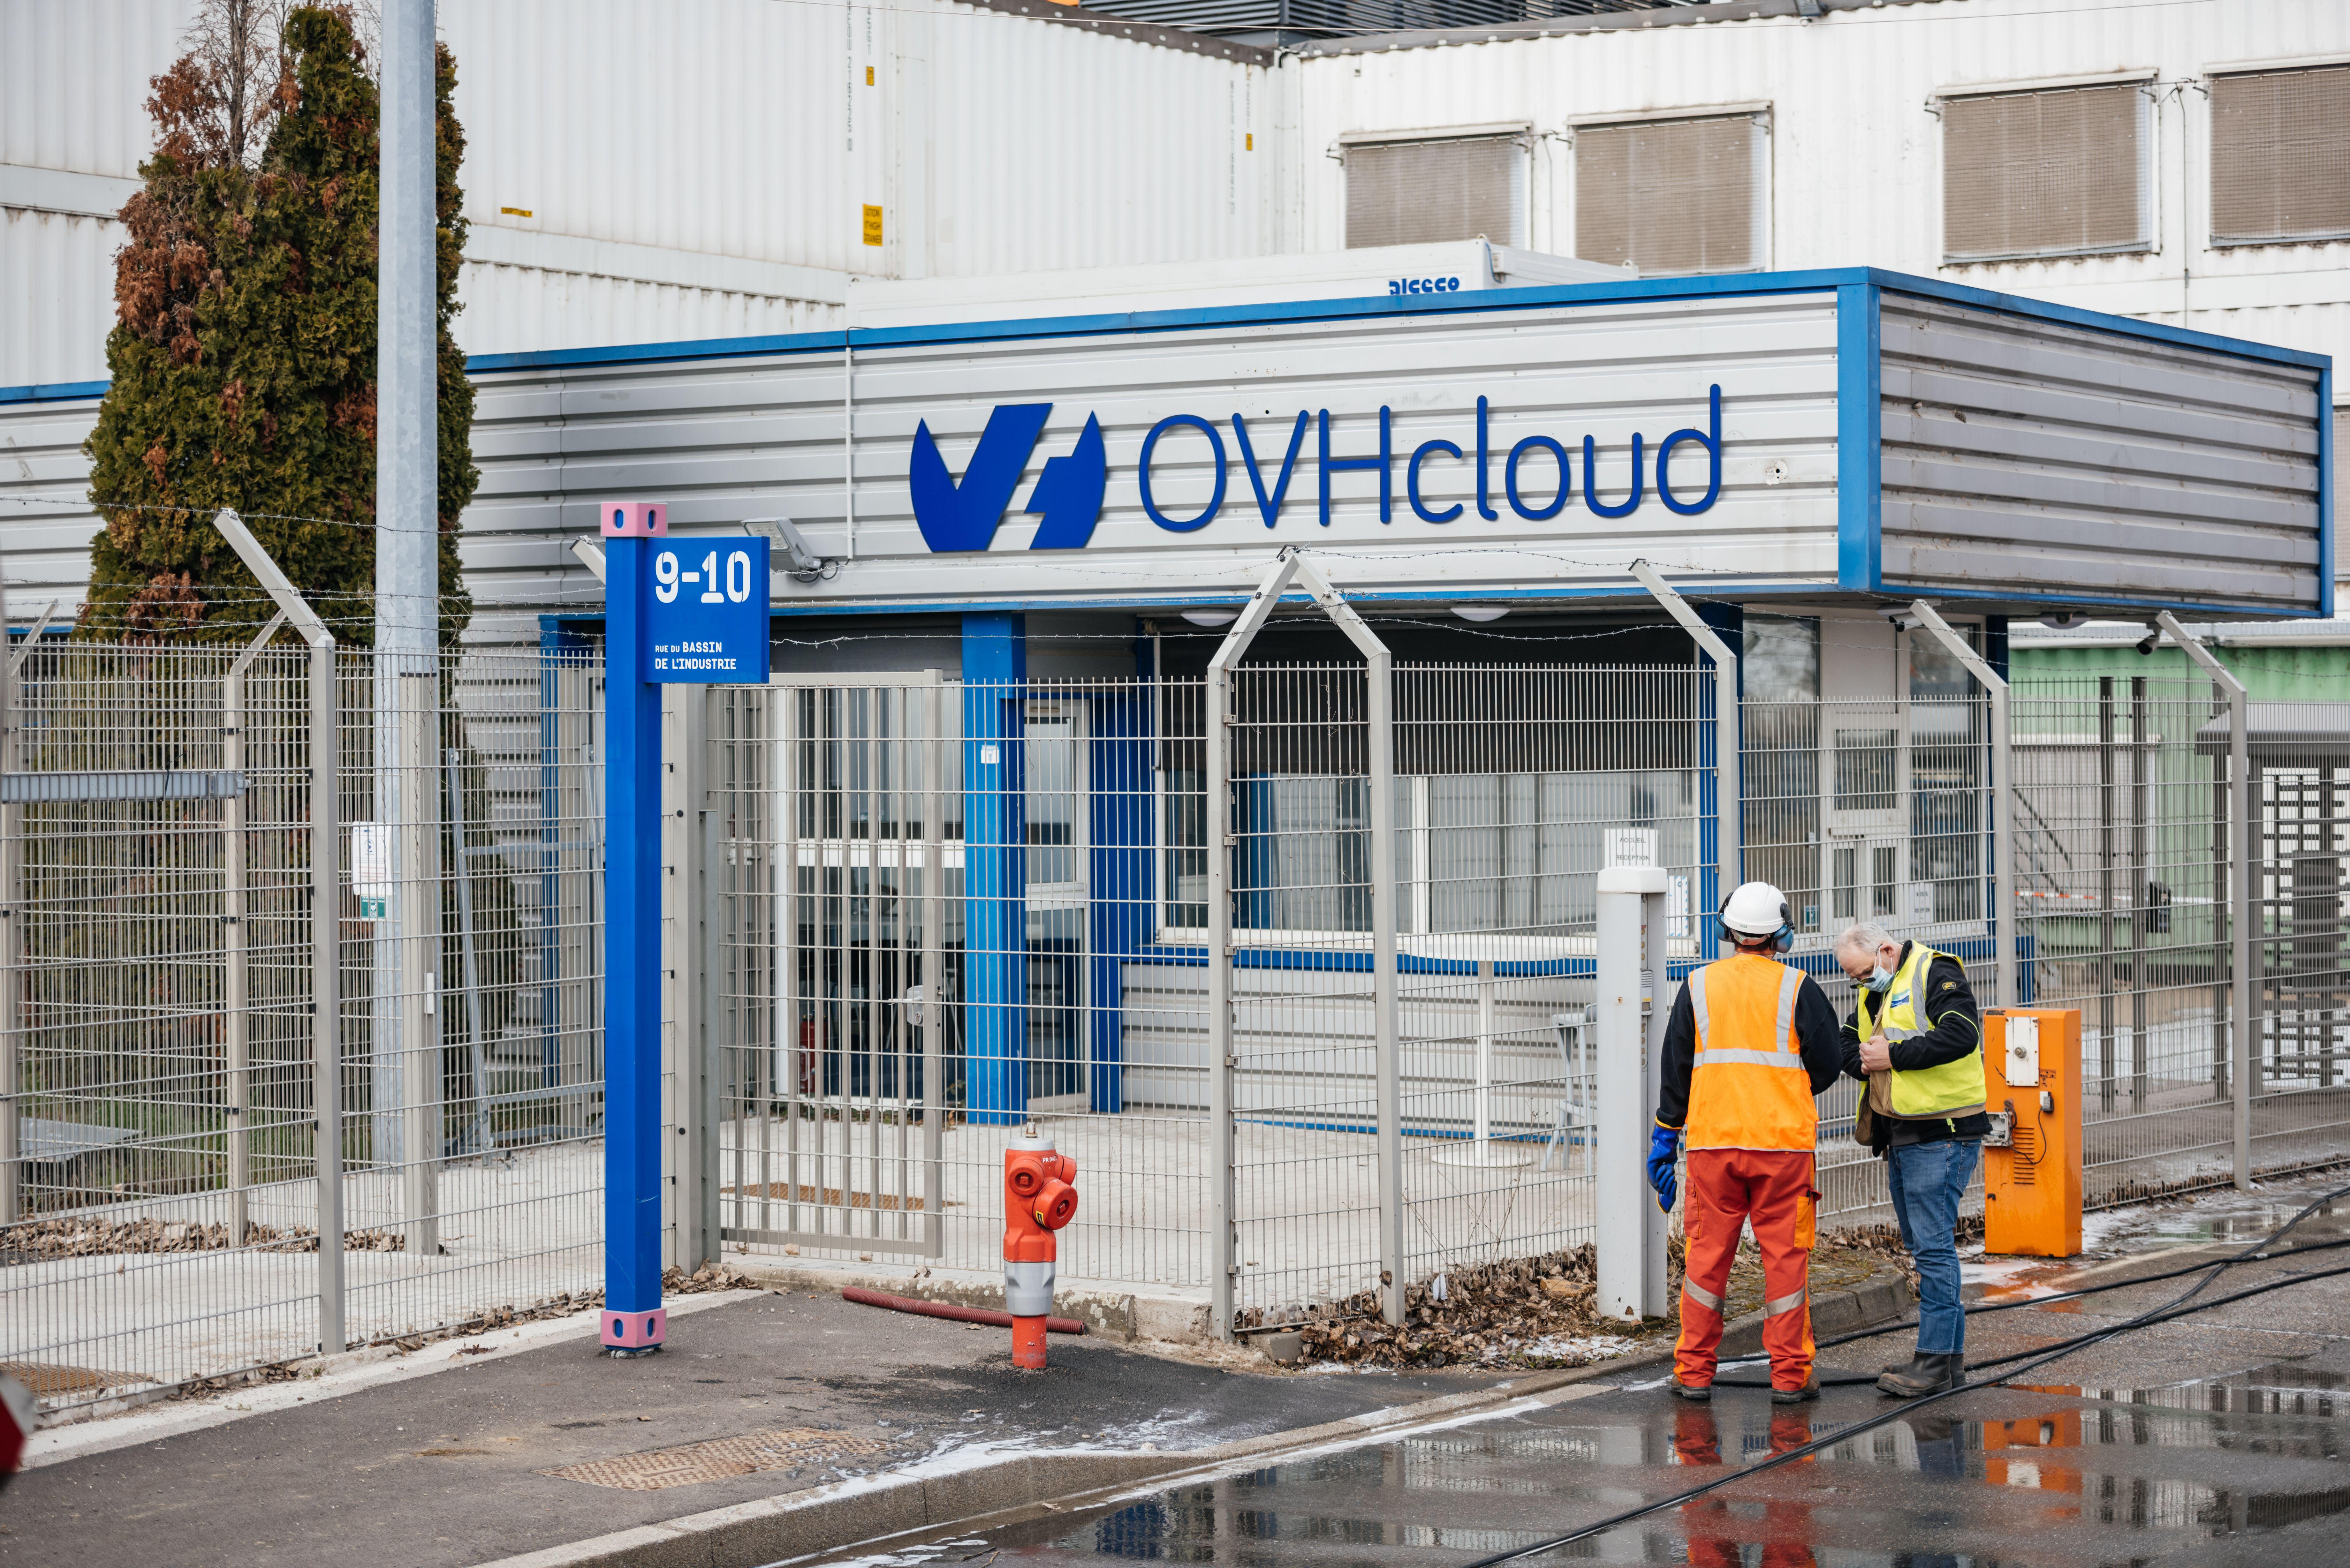 Firefighters near large data center OVH Cloud in Strasbourg, France.